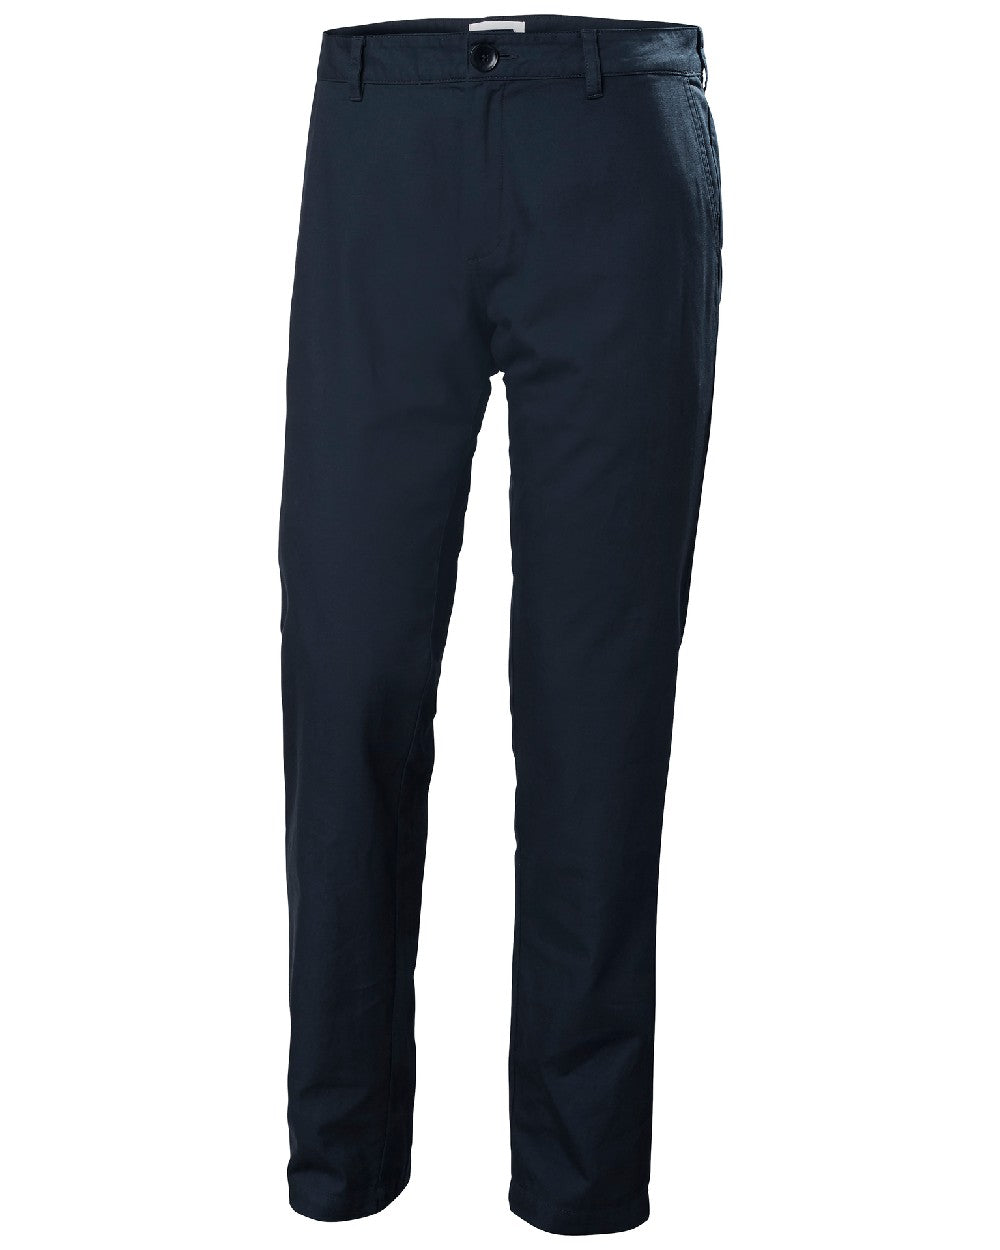 Navy coloured Helly Hansen Mens Dock Chinos on white background 